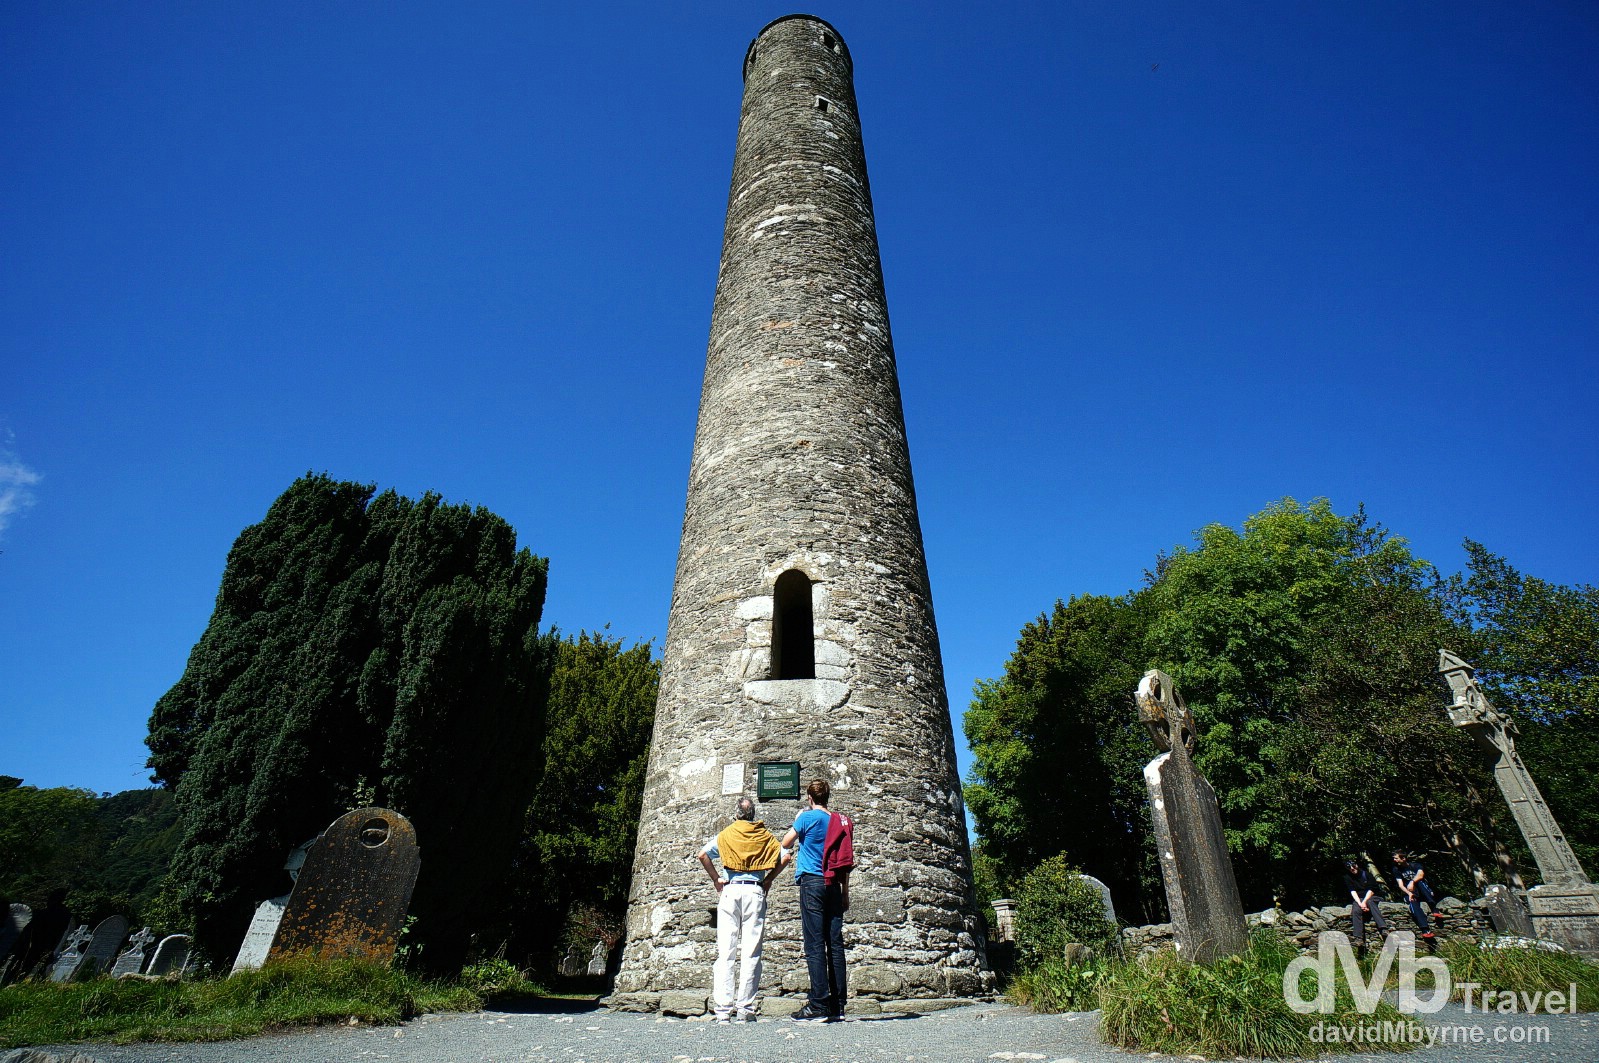 Admiring the Round Tower in Glendalough, Co. Wicklow, Ireland. August 31, 2014.